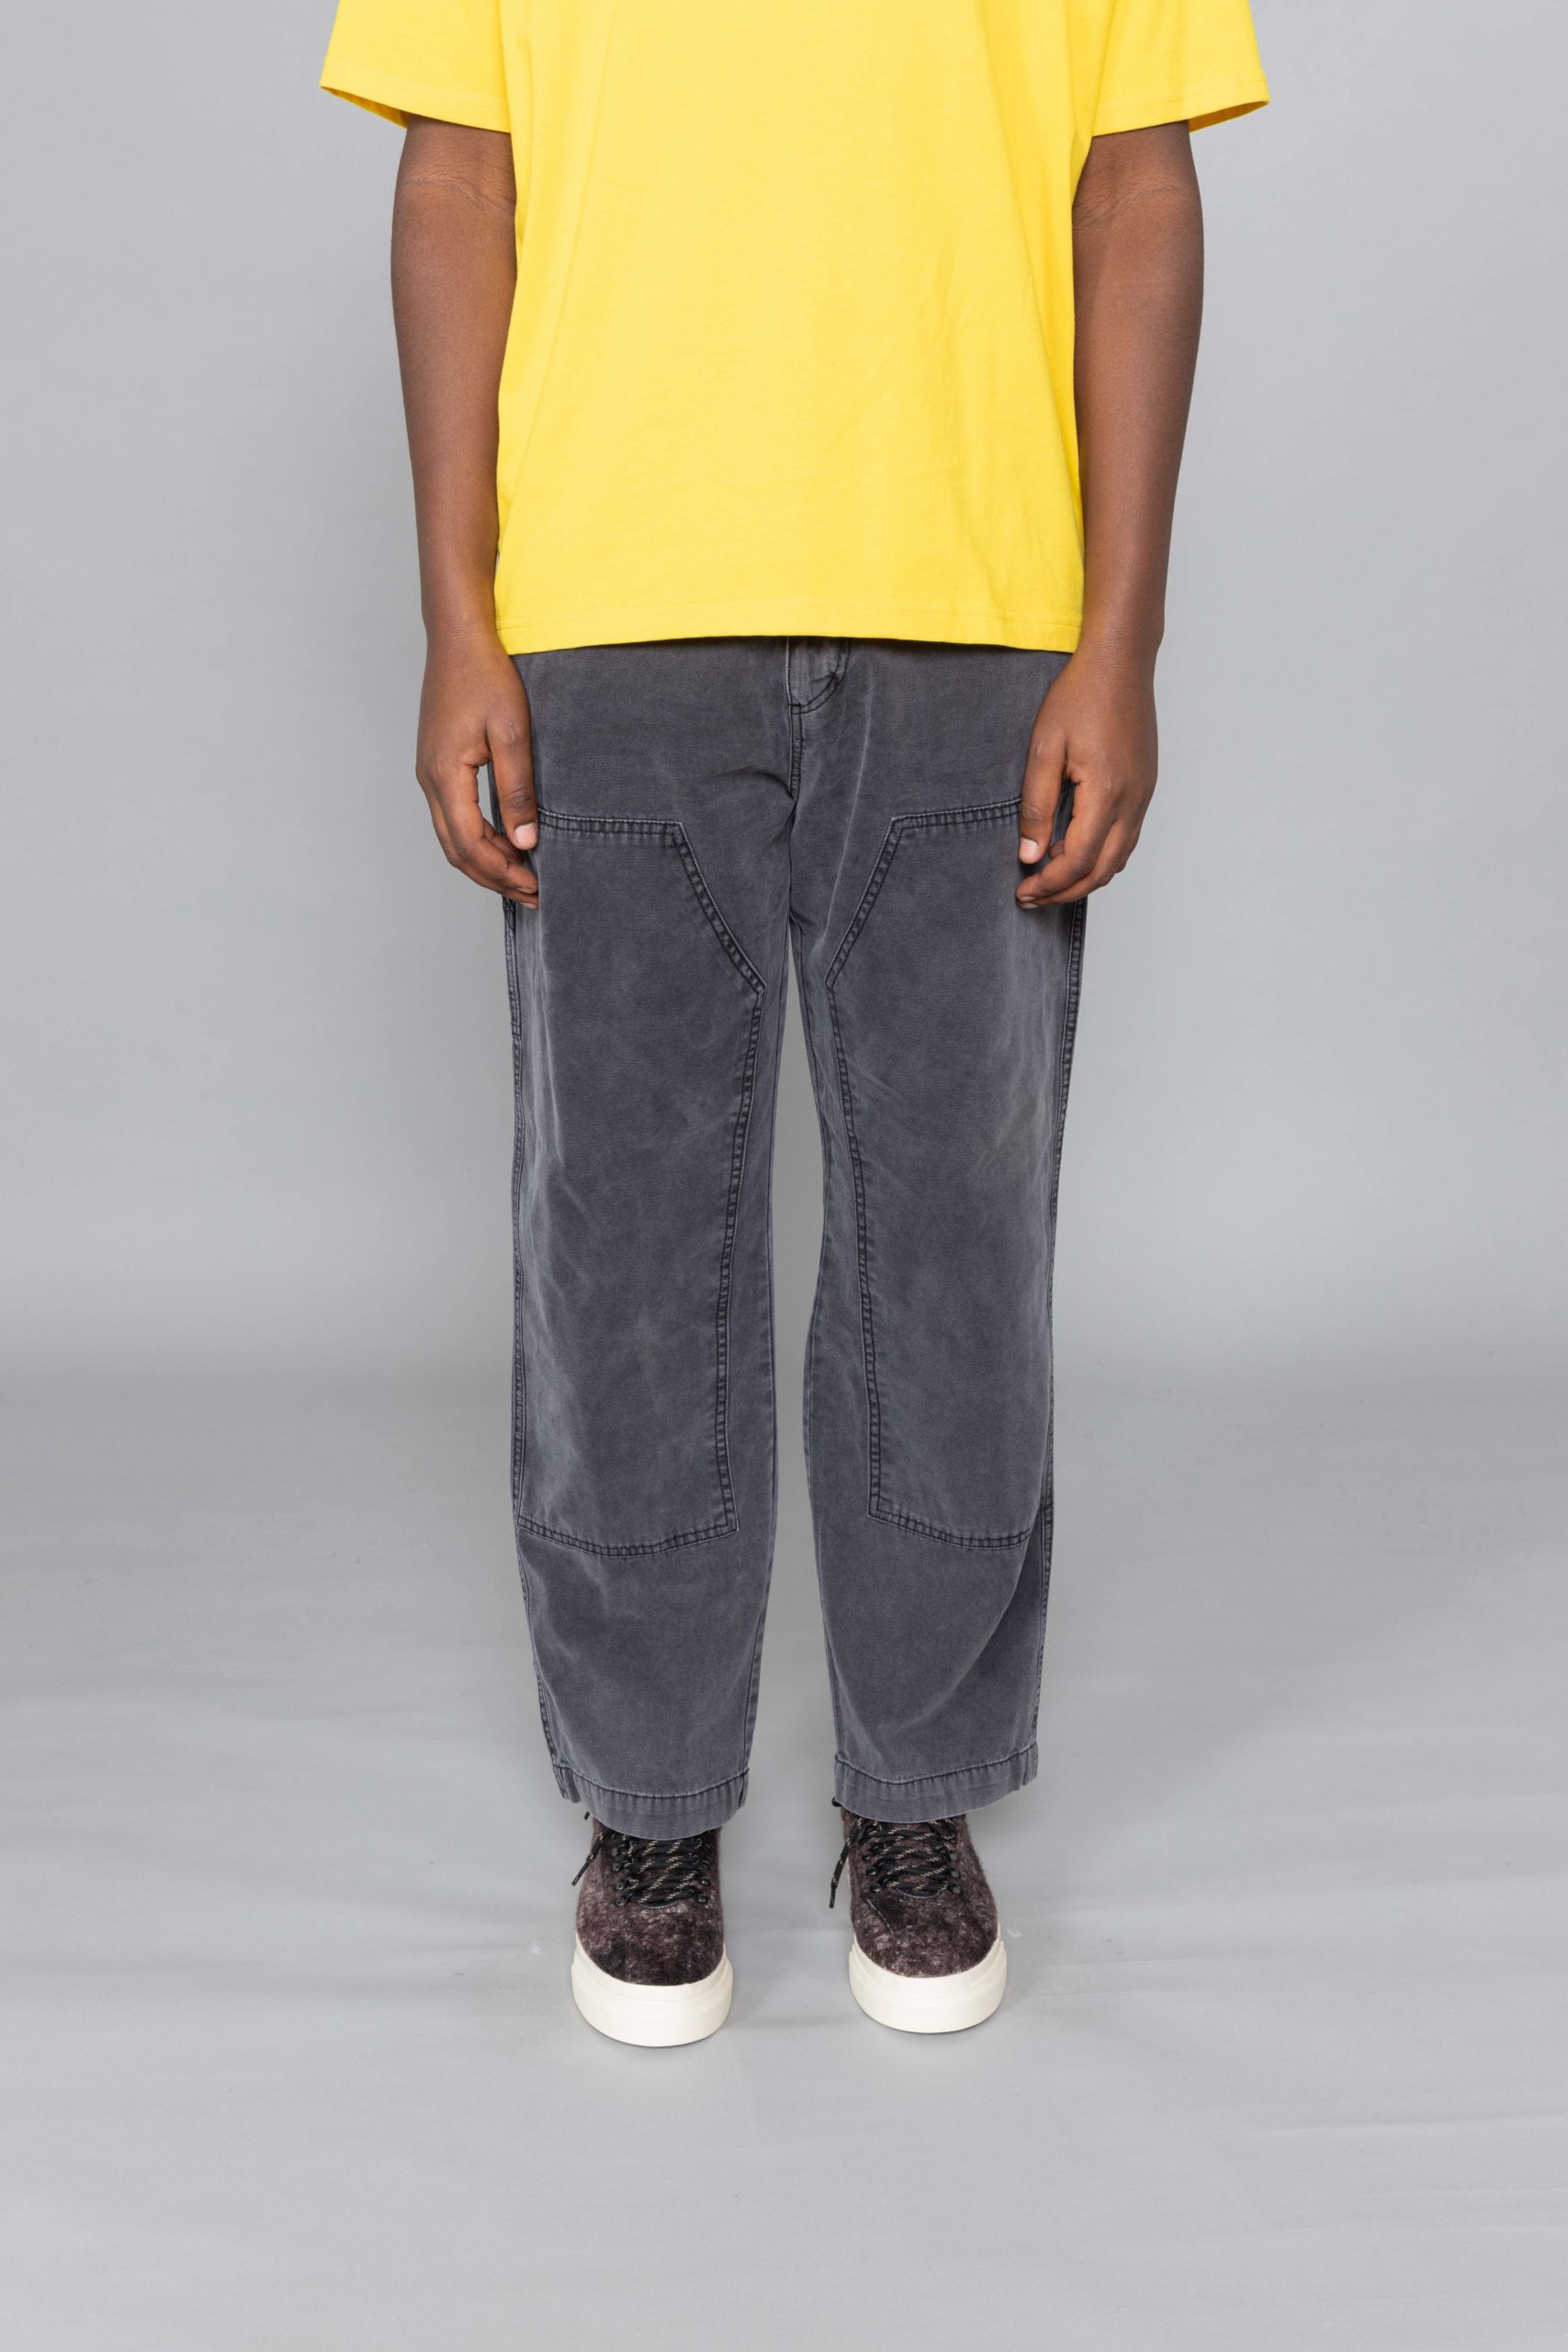 Stussy Washed Canvas Work Pant Grey brussels store - Centrevillestore